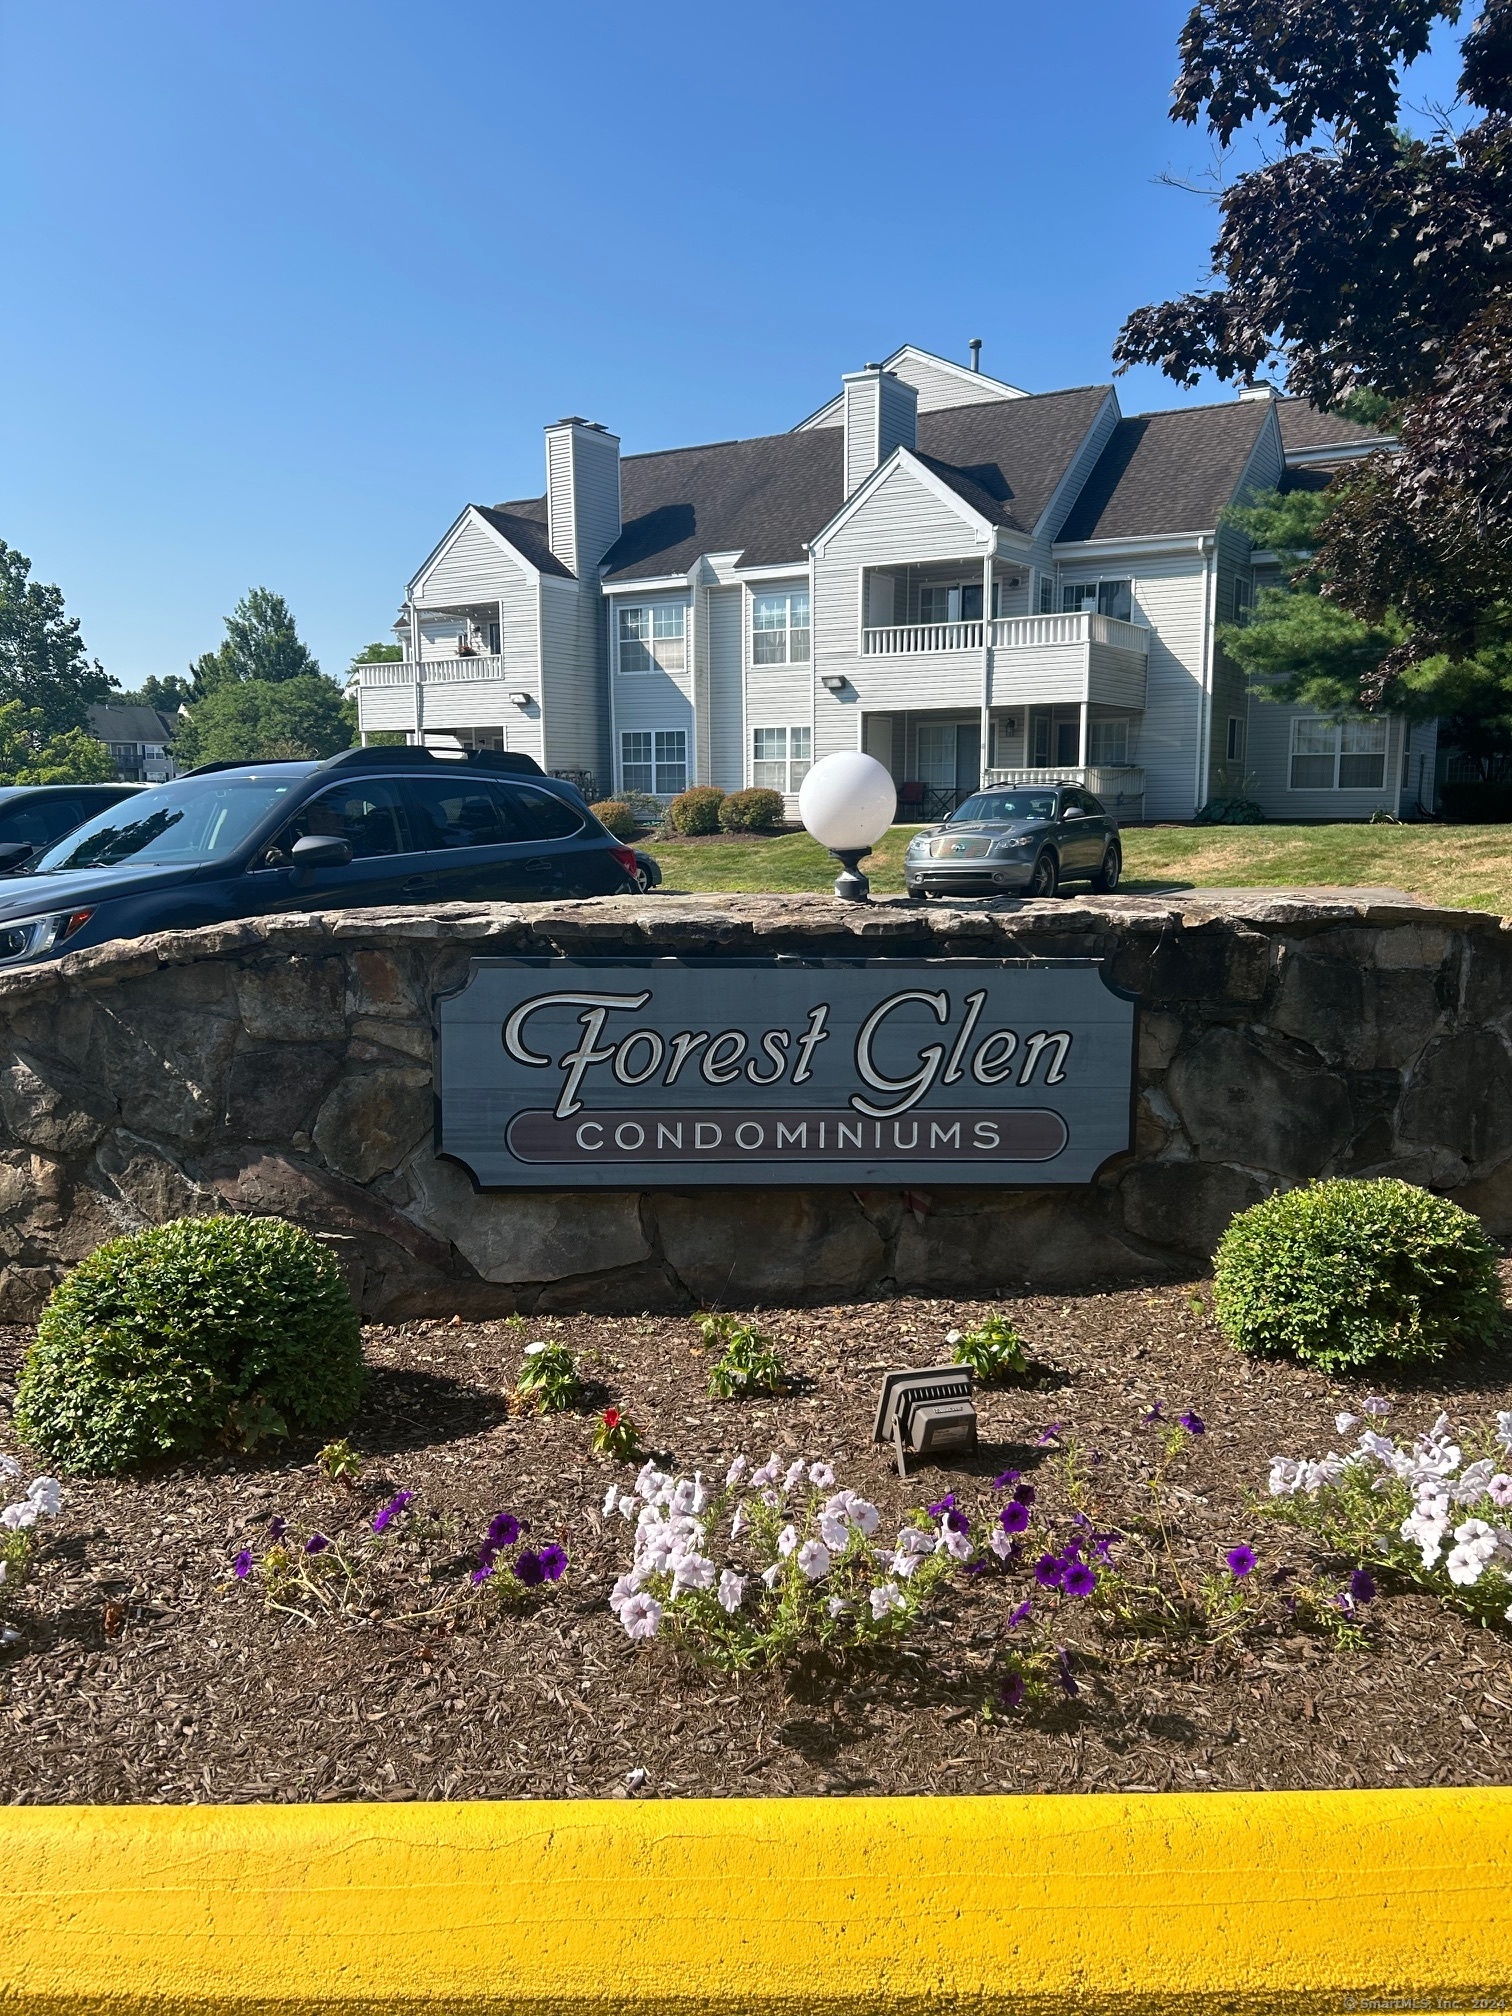 Rental Property at 120 Forest Glen Circle 1-20, Middletown, Connecticut - Bedrooms: 2 
Bathrooms: 2 
Rooms: 4  - $1,900 MO.